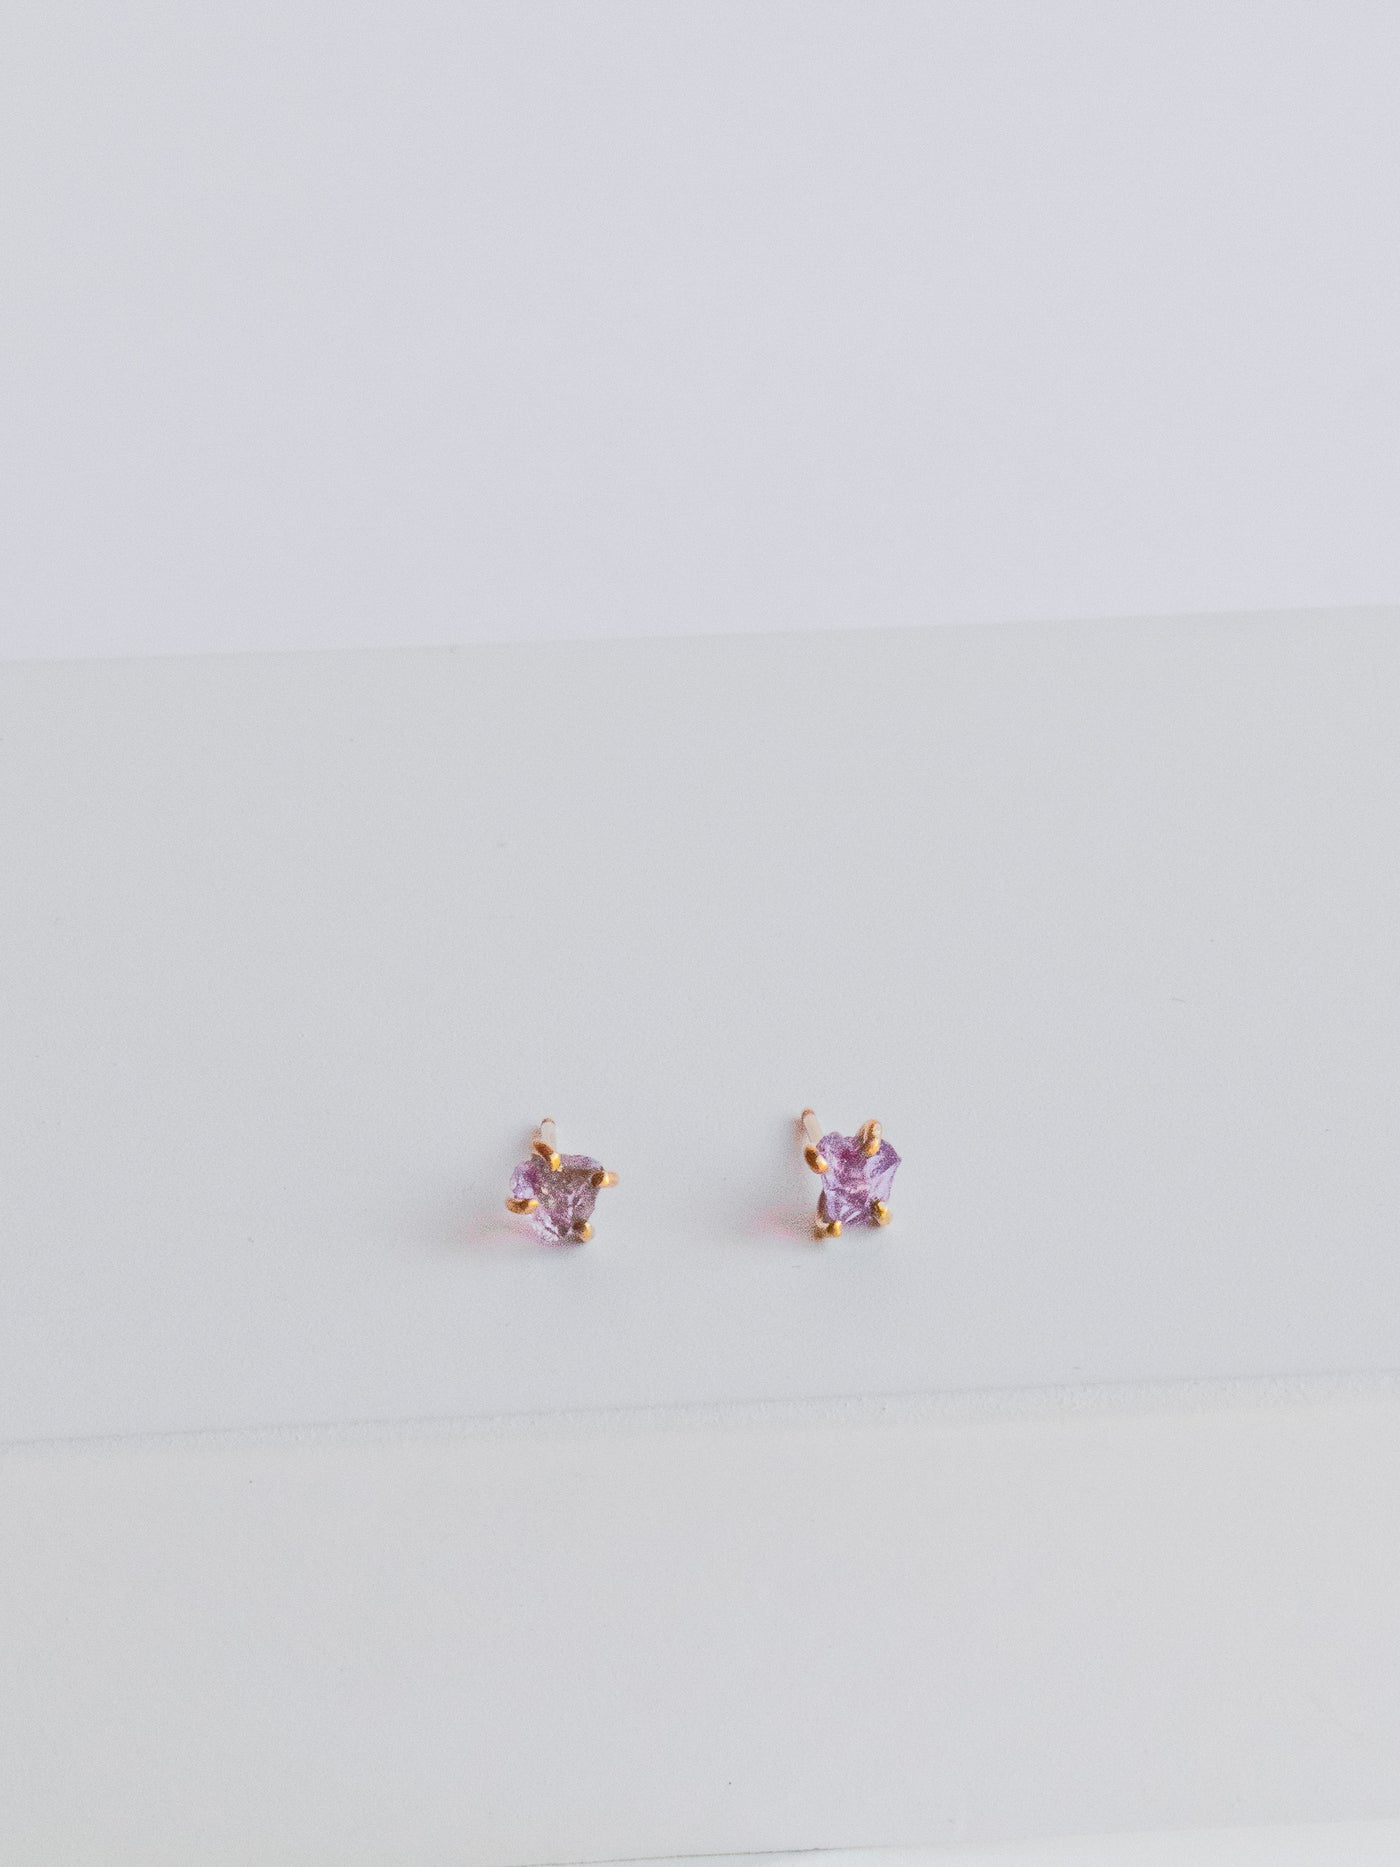 Raw Amethyst Gold Stud Earrings. These versatile raw amethyst stud make for an ideal statement piece and are set in high quality 14k yellow gold prongs.